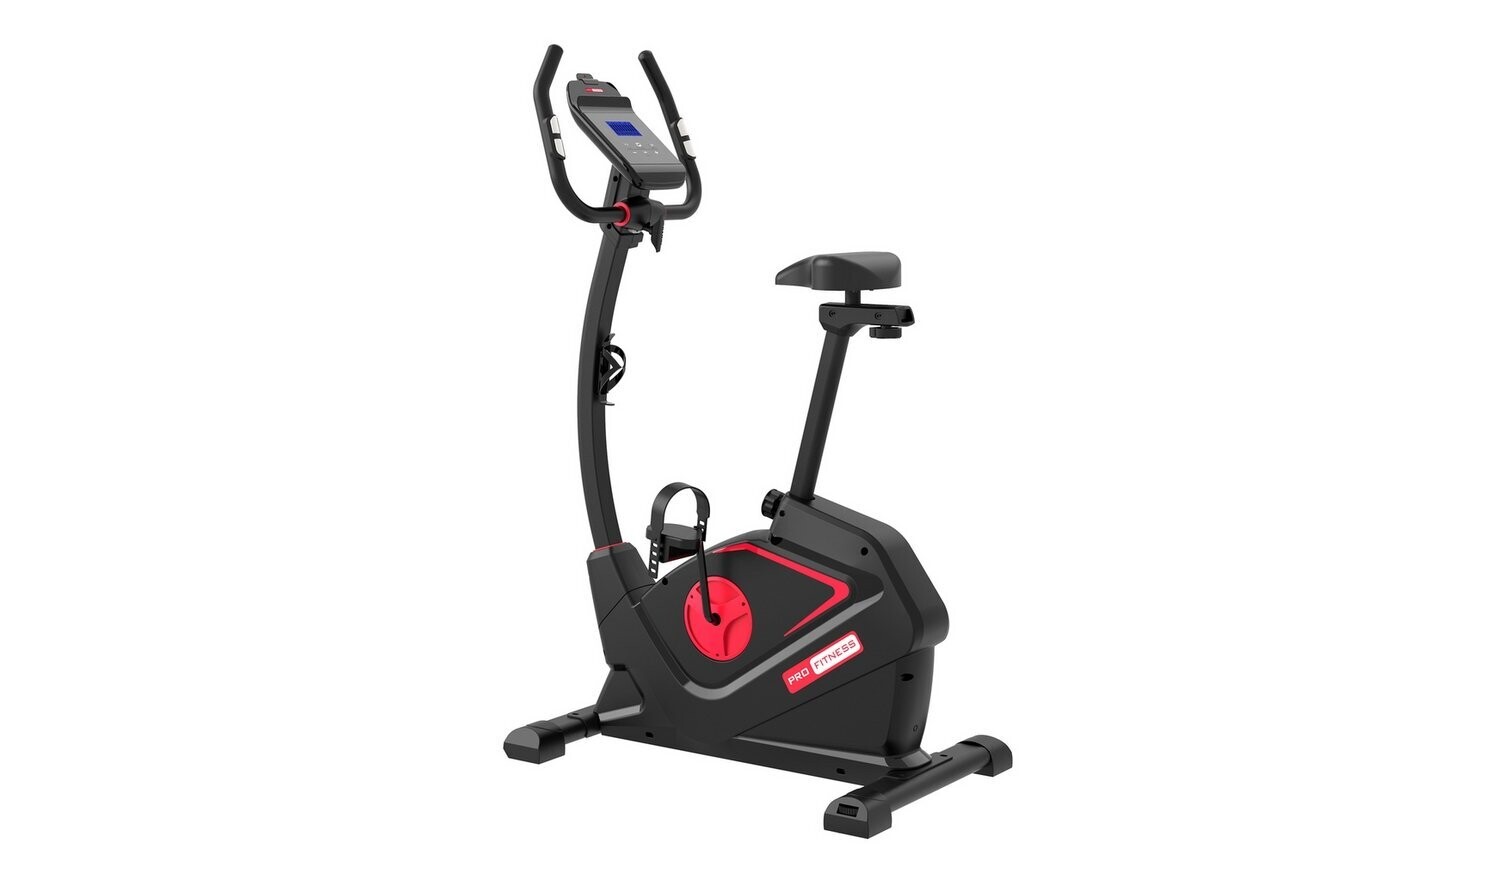 Pro Fitness EB2000 Exercise Bike (new in the original box)